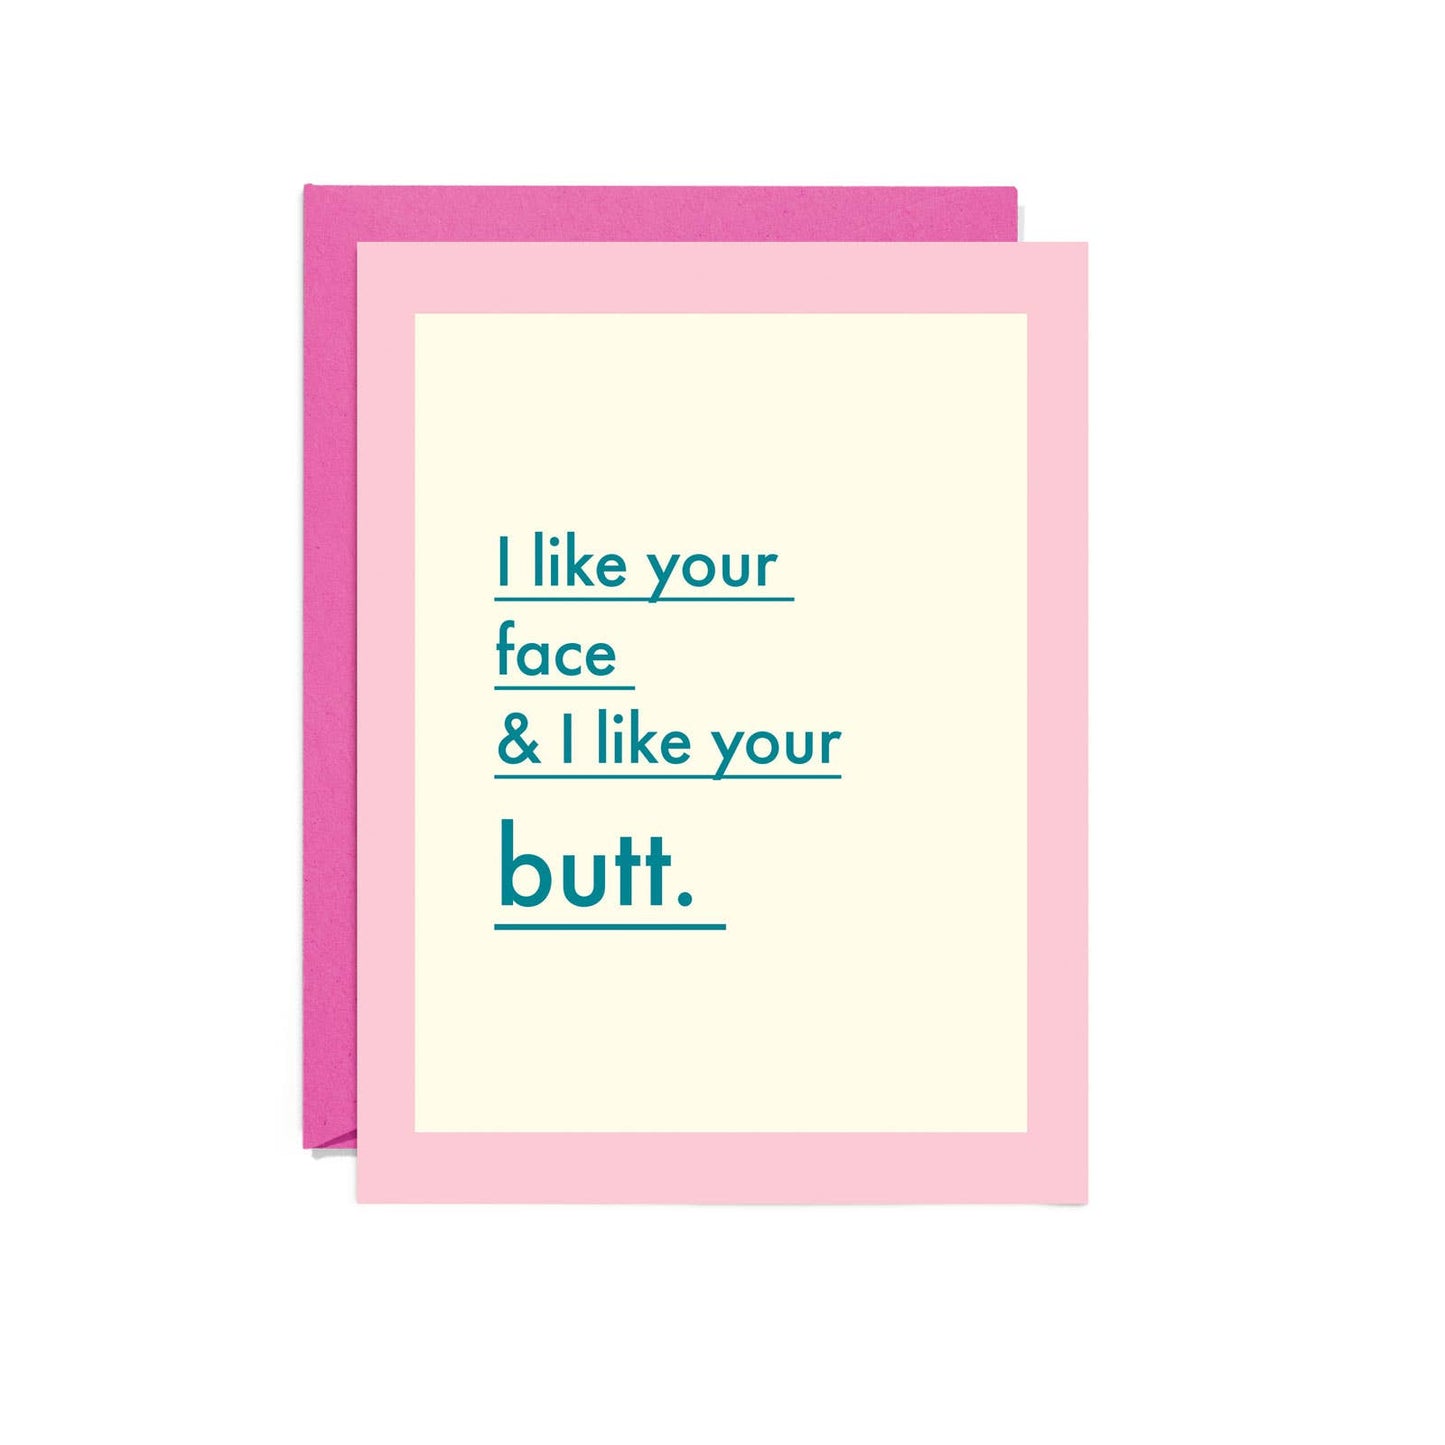 Party Mountain Paper co. - Like Your Face & Your Butt | Love Card